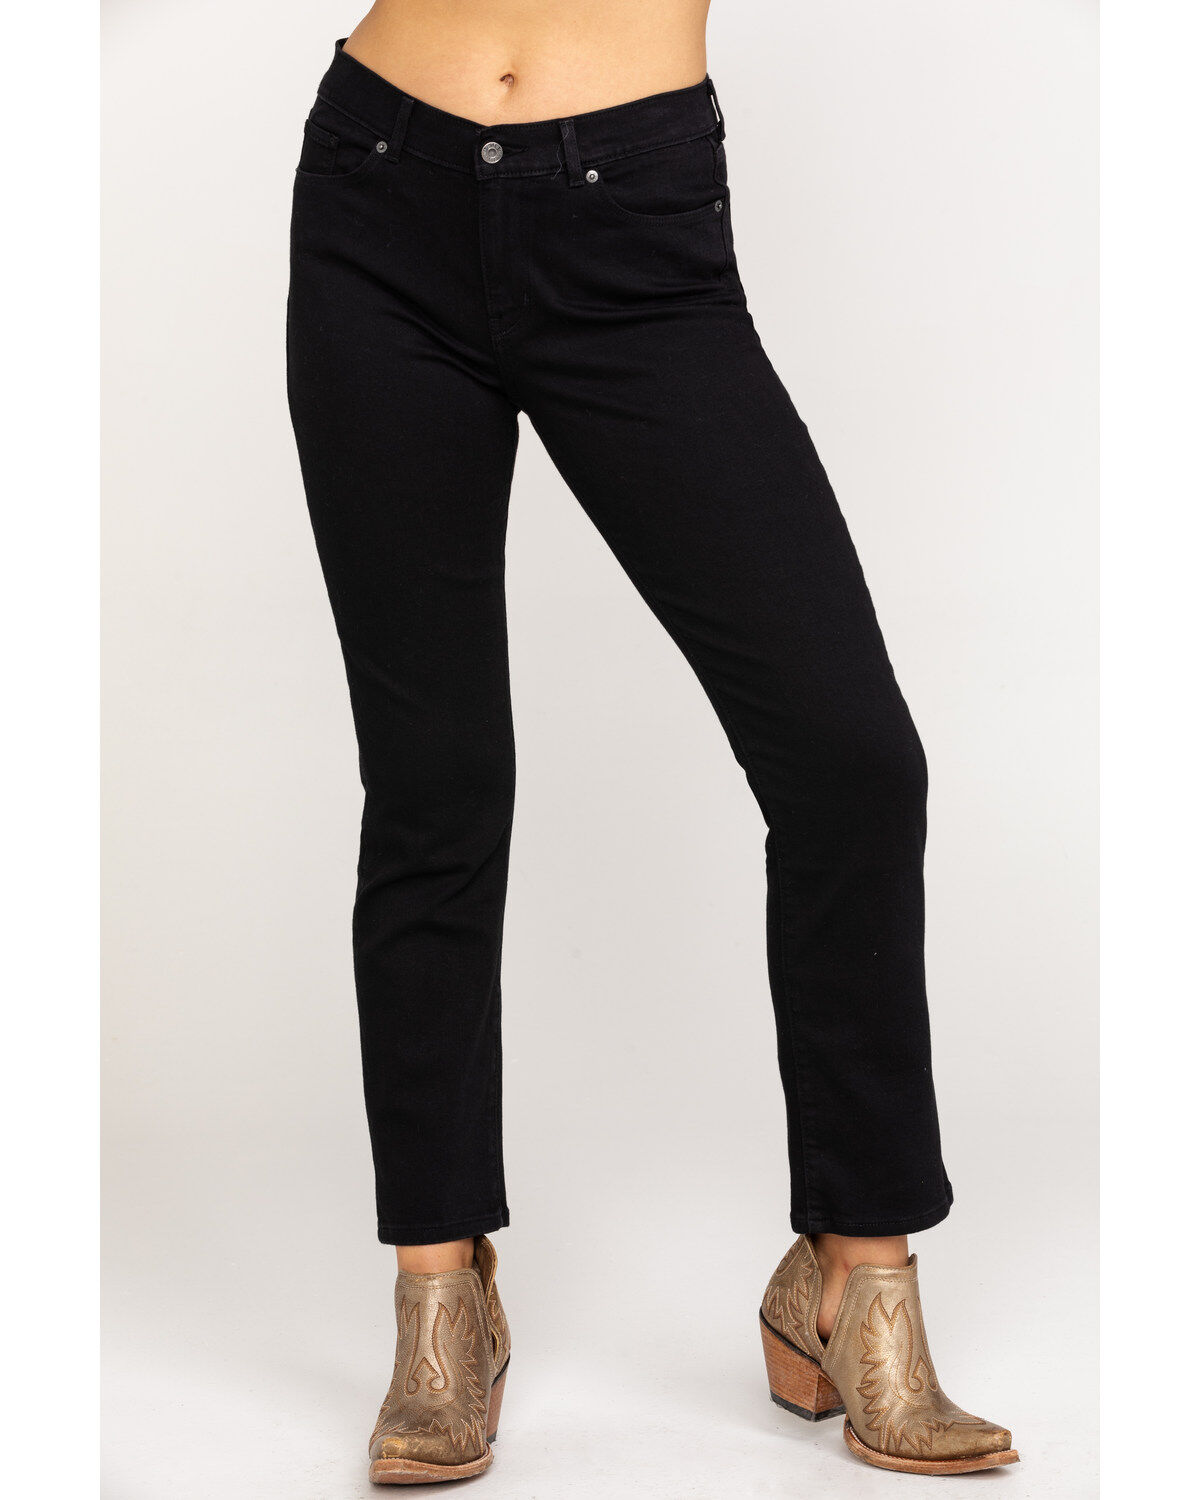 levi's classic straight fit jeans